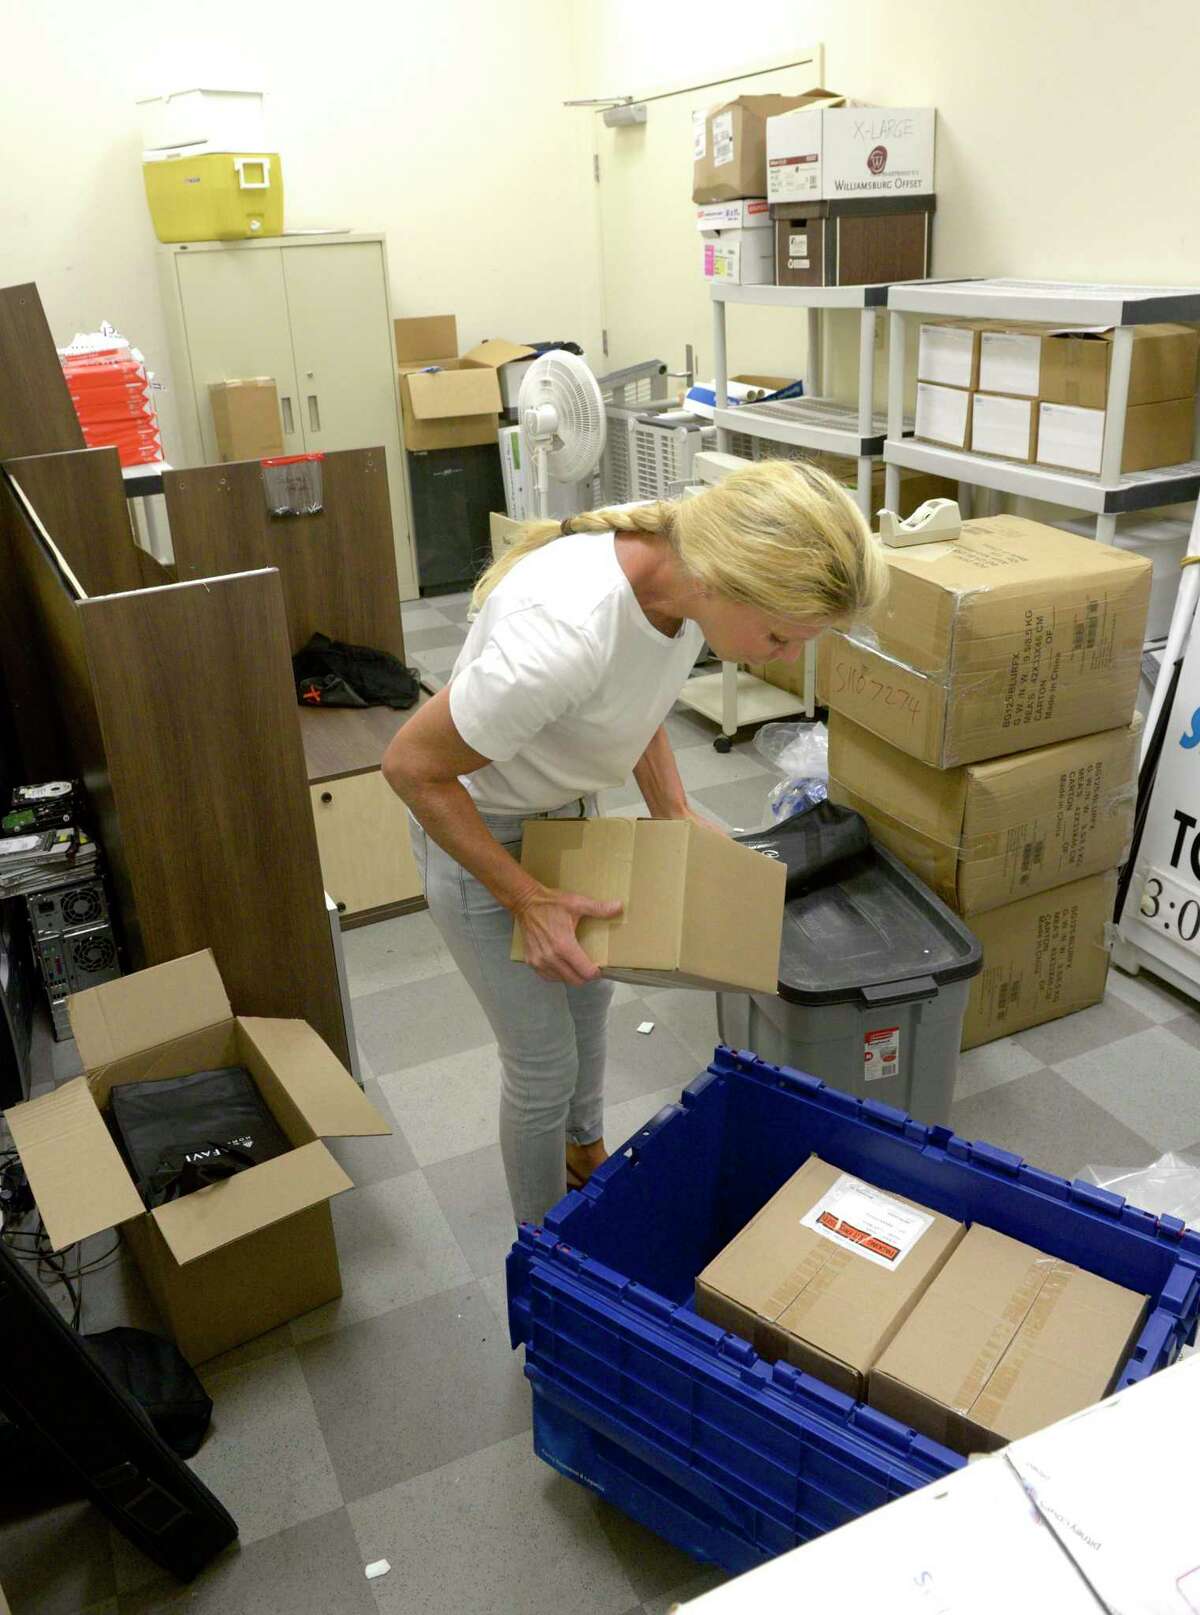 JoAnn Cueva packs up the storage room at the Greater Danbury Chamber of Commerce for their move to new office space at 1 Ives Street. Cueva is Director of Events and Business Development. Thursday, September 26, 2019, in Danbury, Conn.